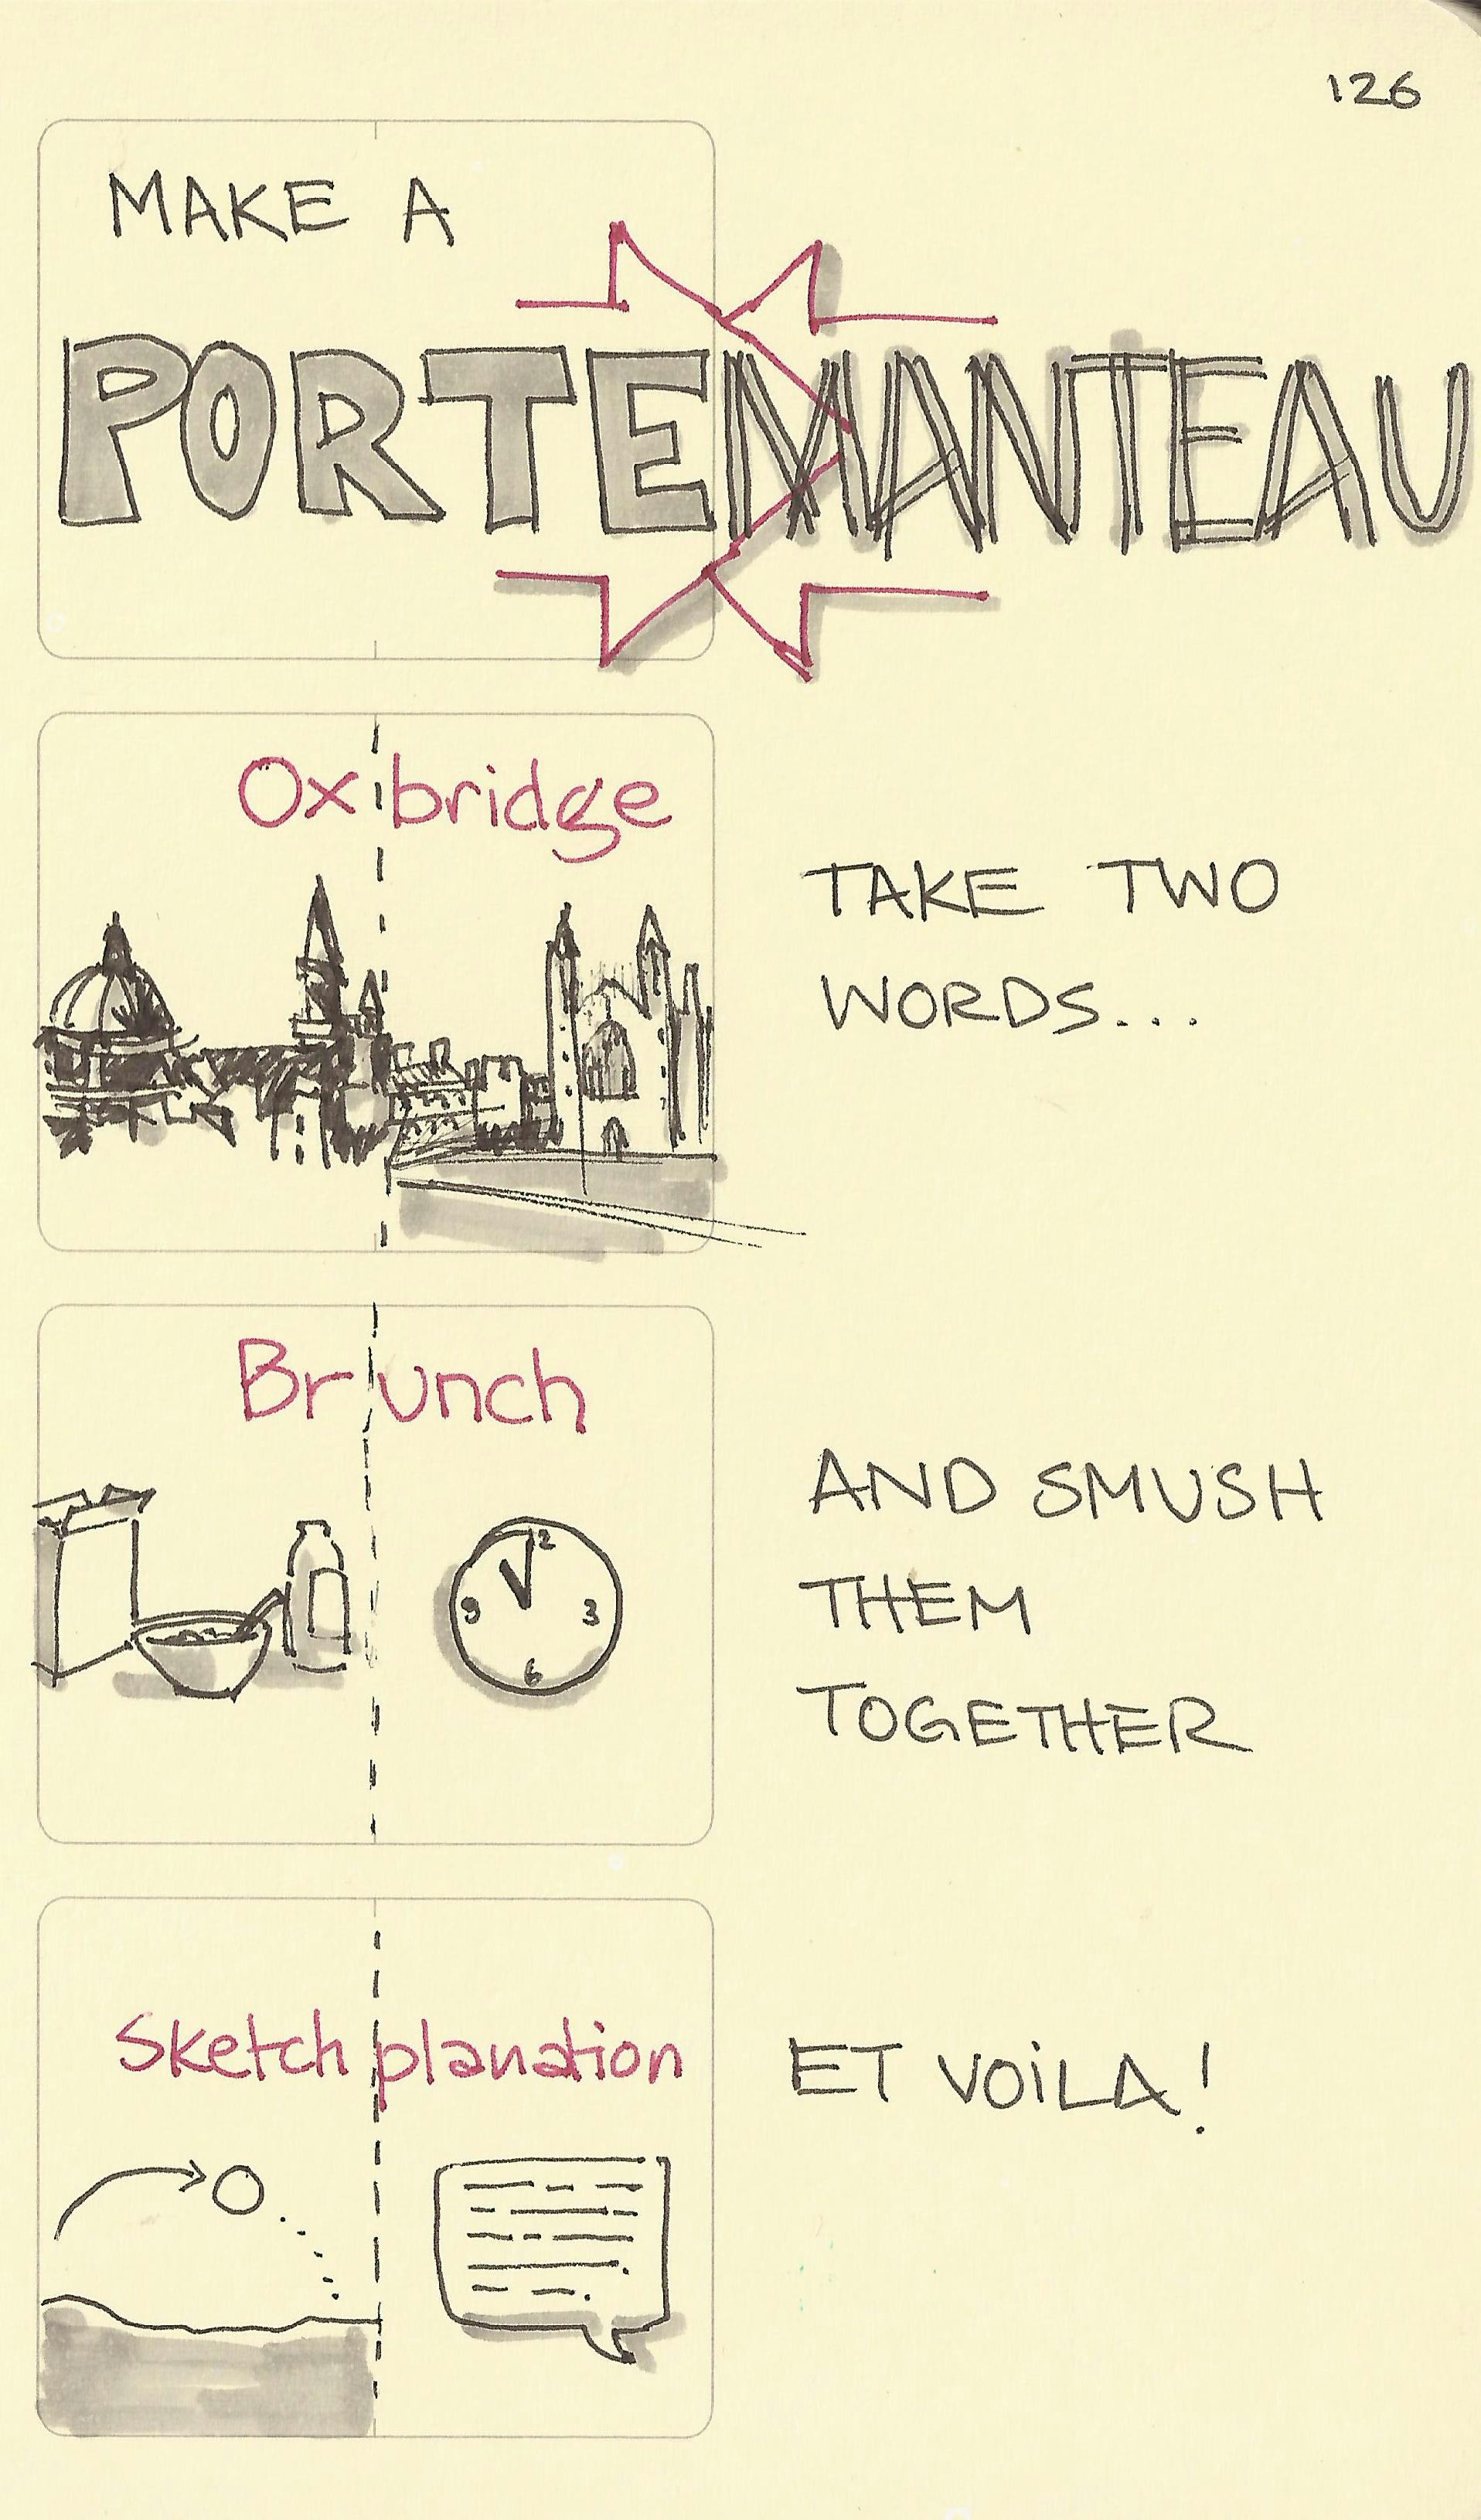 How to make a portemanteau - by smashing words together inluding Oxbridge, brunch, and sketchplanations